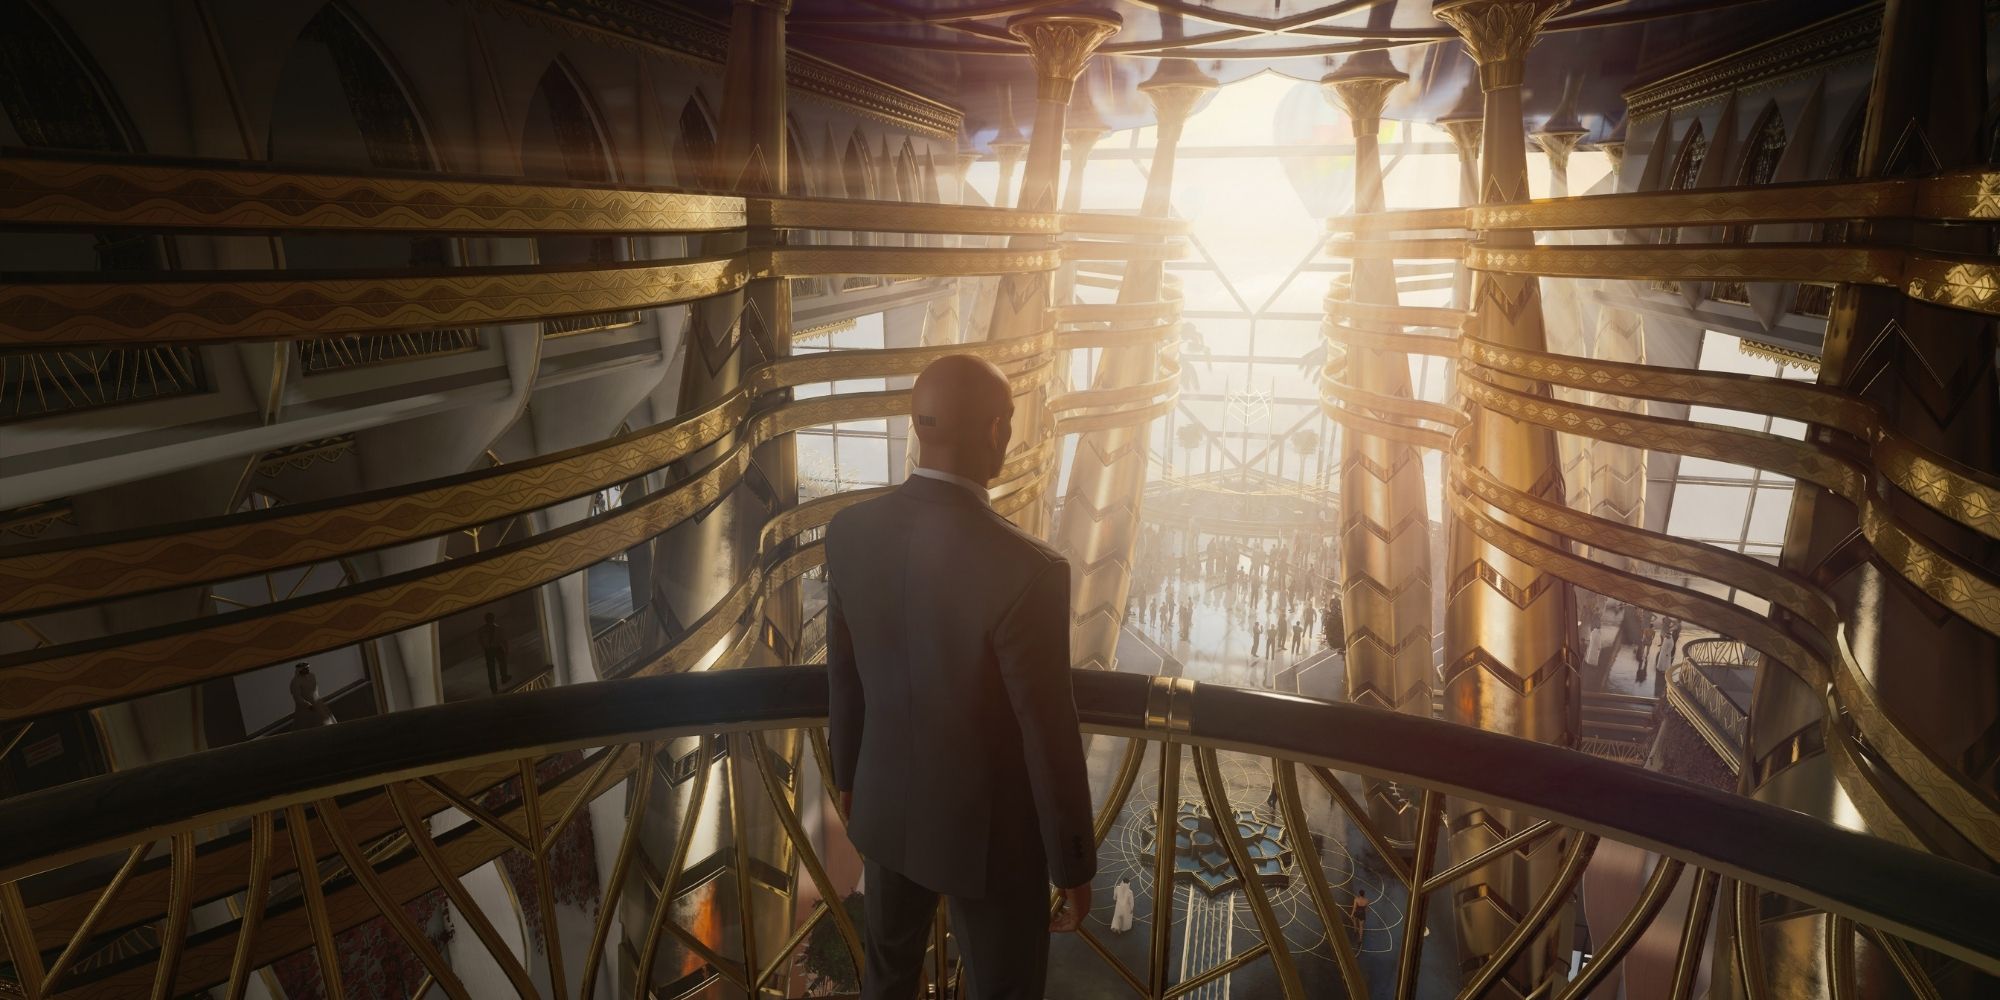 Hitman 3 Freelancer to launch in January 2023